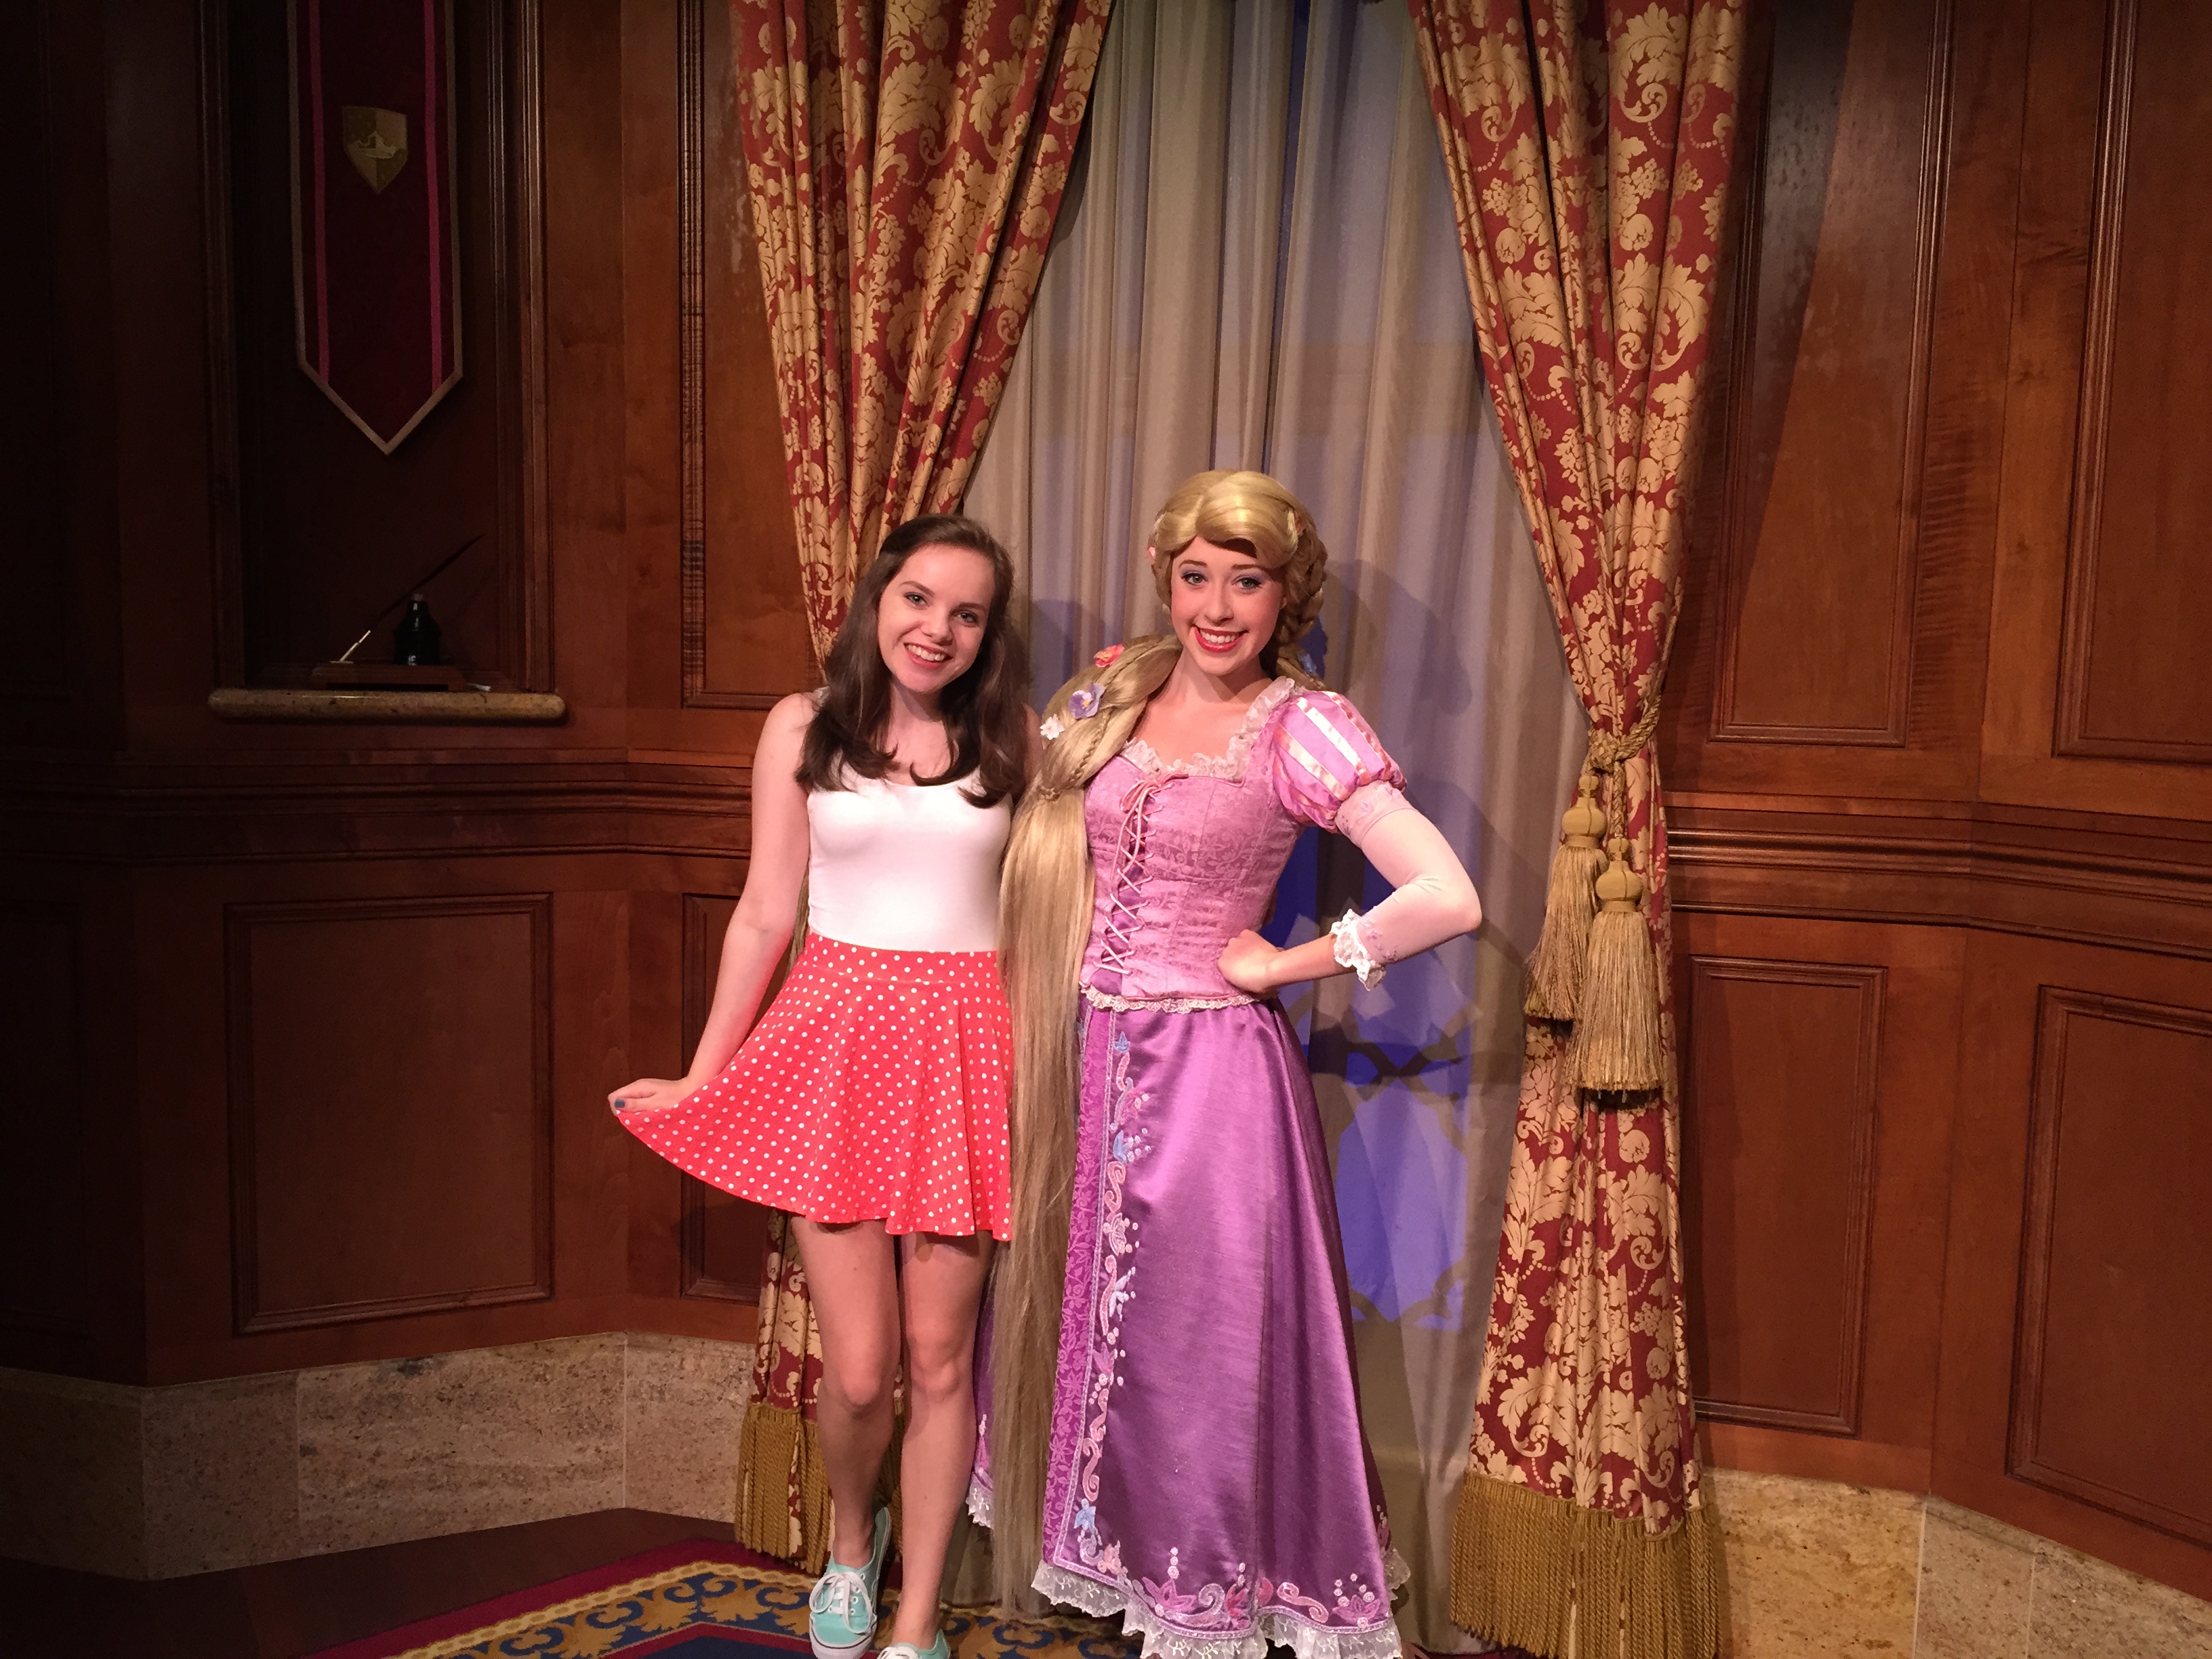 Every Princess in One Day at WDW